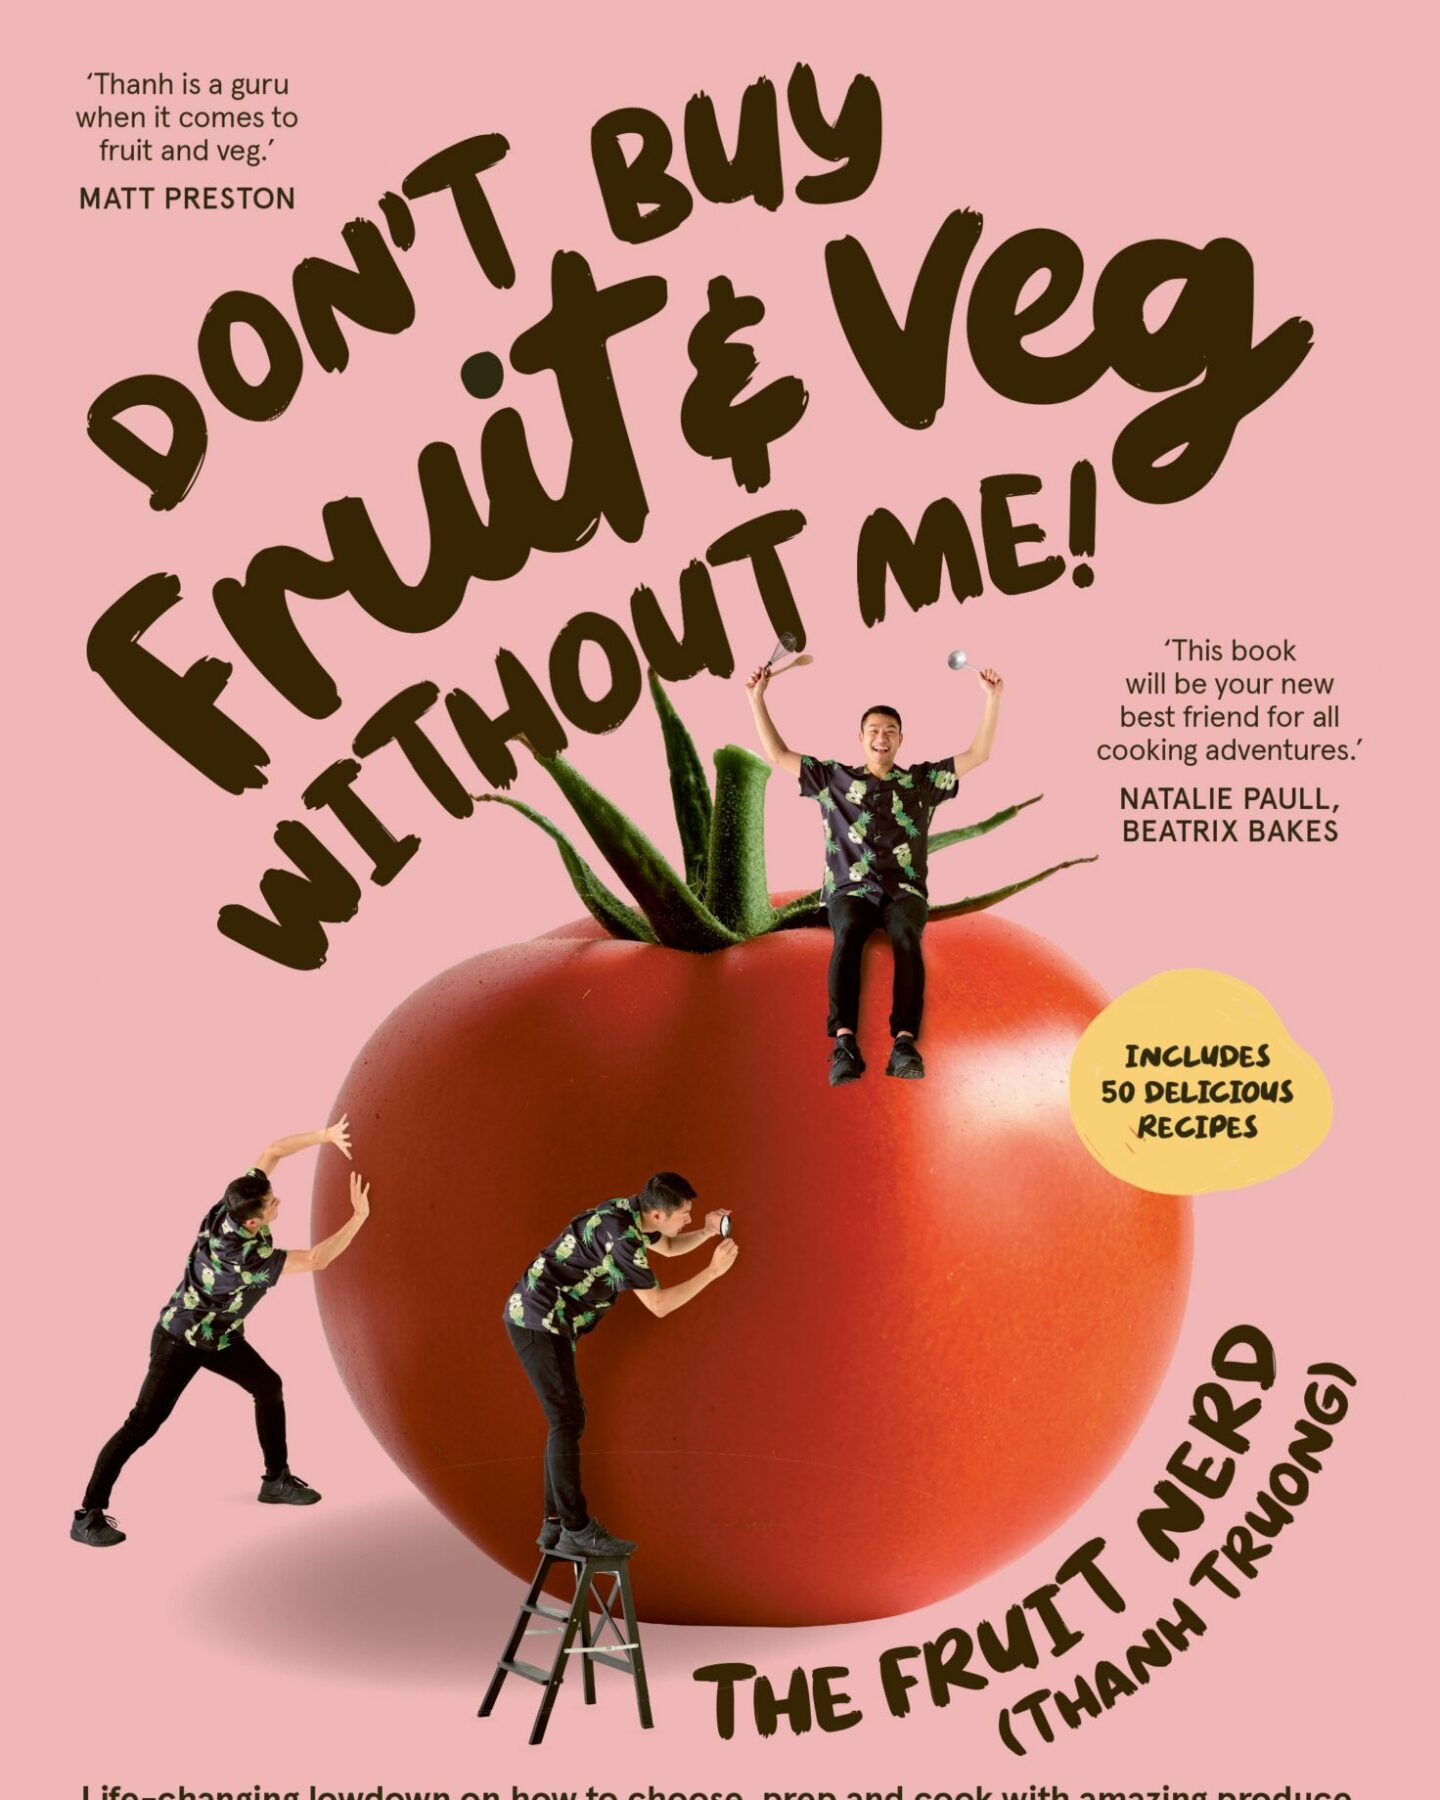 A pink book cover with a large tomato in the centre and images of Thanh sitting on, pushing, and inspecting the tomato. The title is in large brown letters curved around the top left corner of the tomato